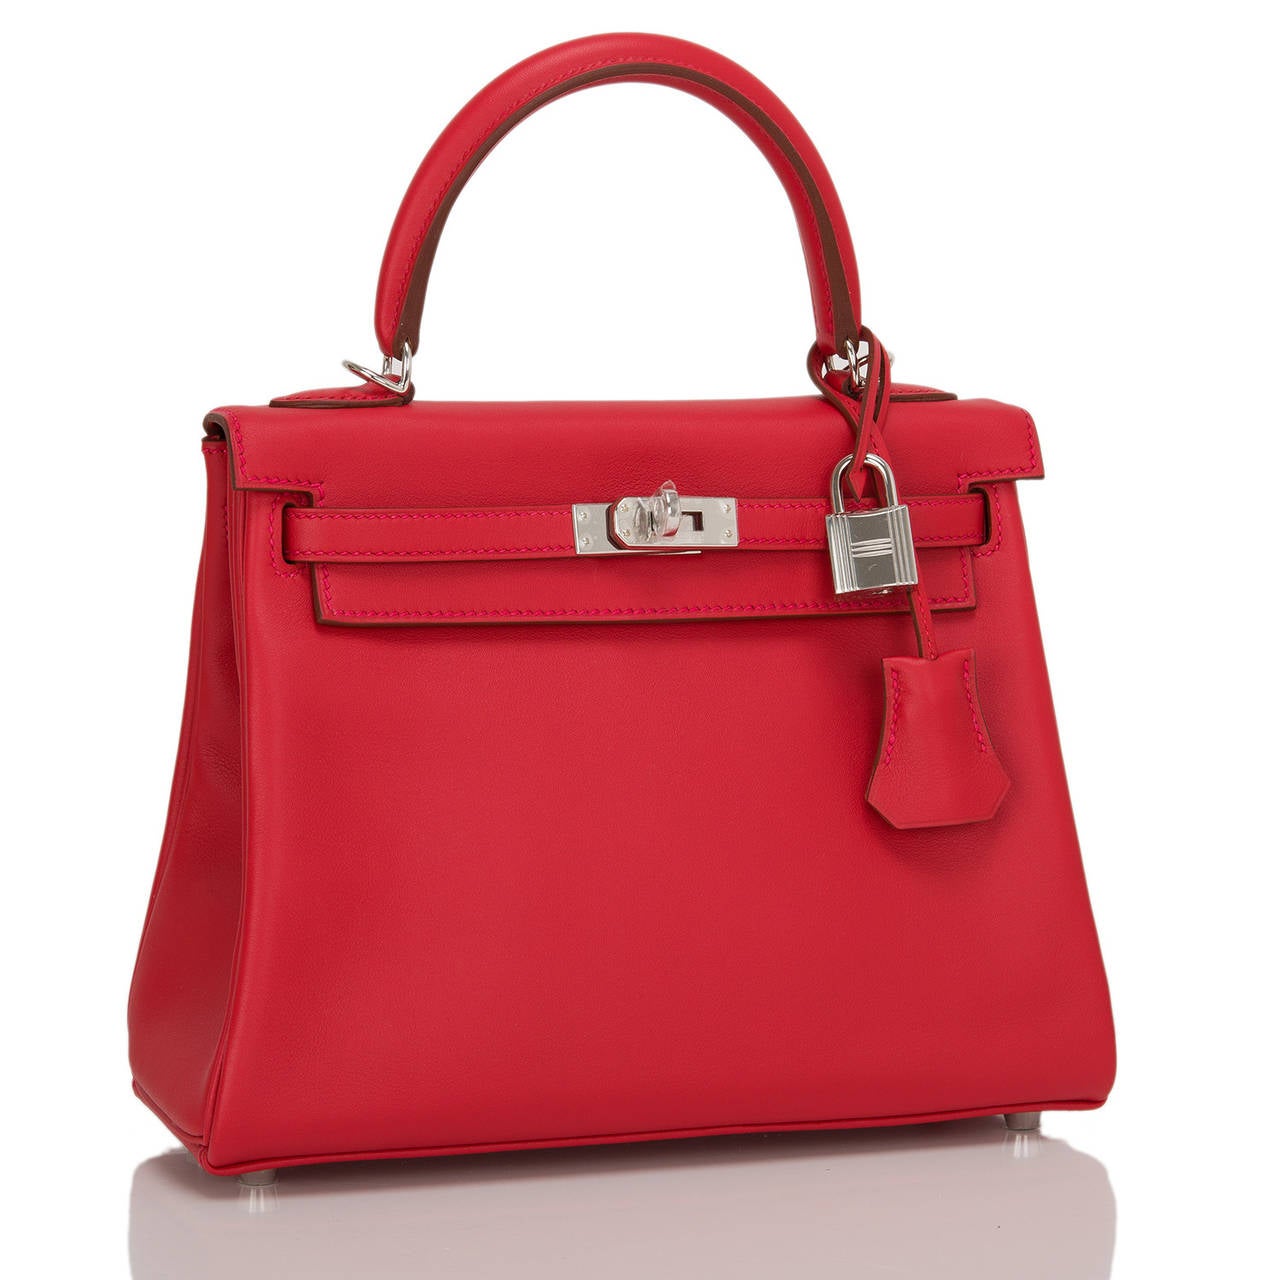 Hermes Vermillion 25cm in swift leather with palladium hardware.

This Kelly features tonal stitching, front toggle closure, a clochette with lock and two keys and a single rolled handle. The interior is lined in Vermillion chevre and features one